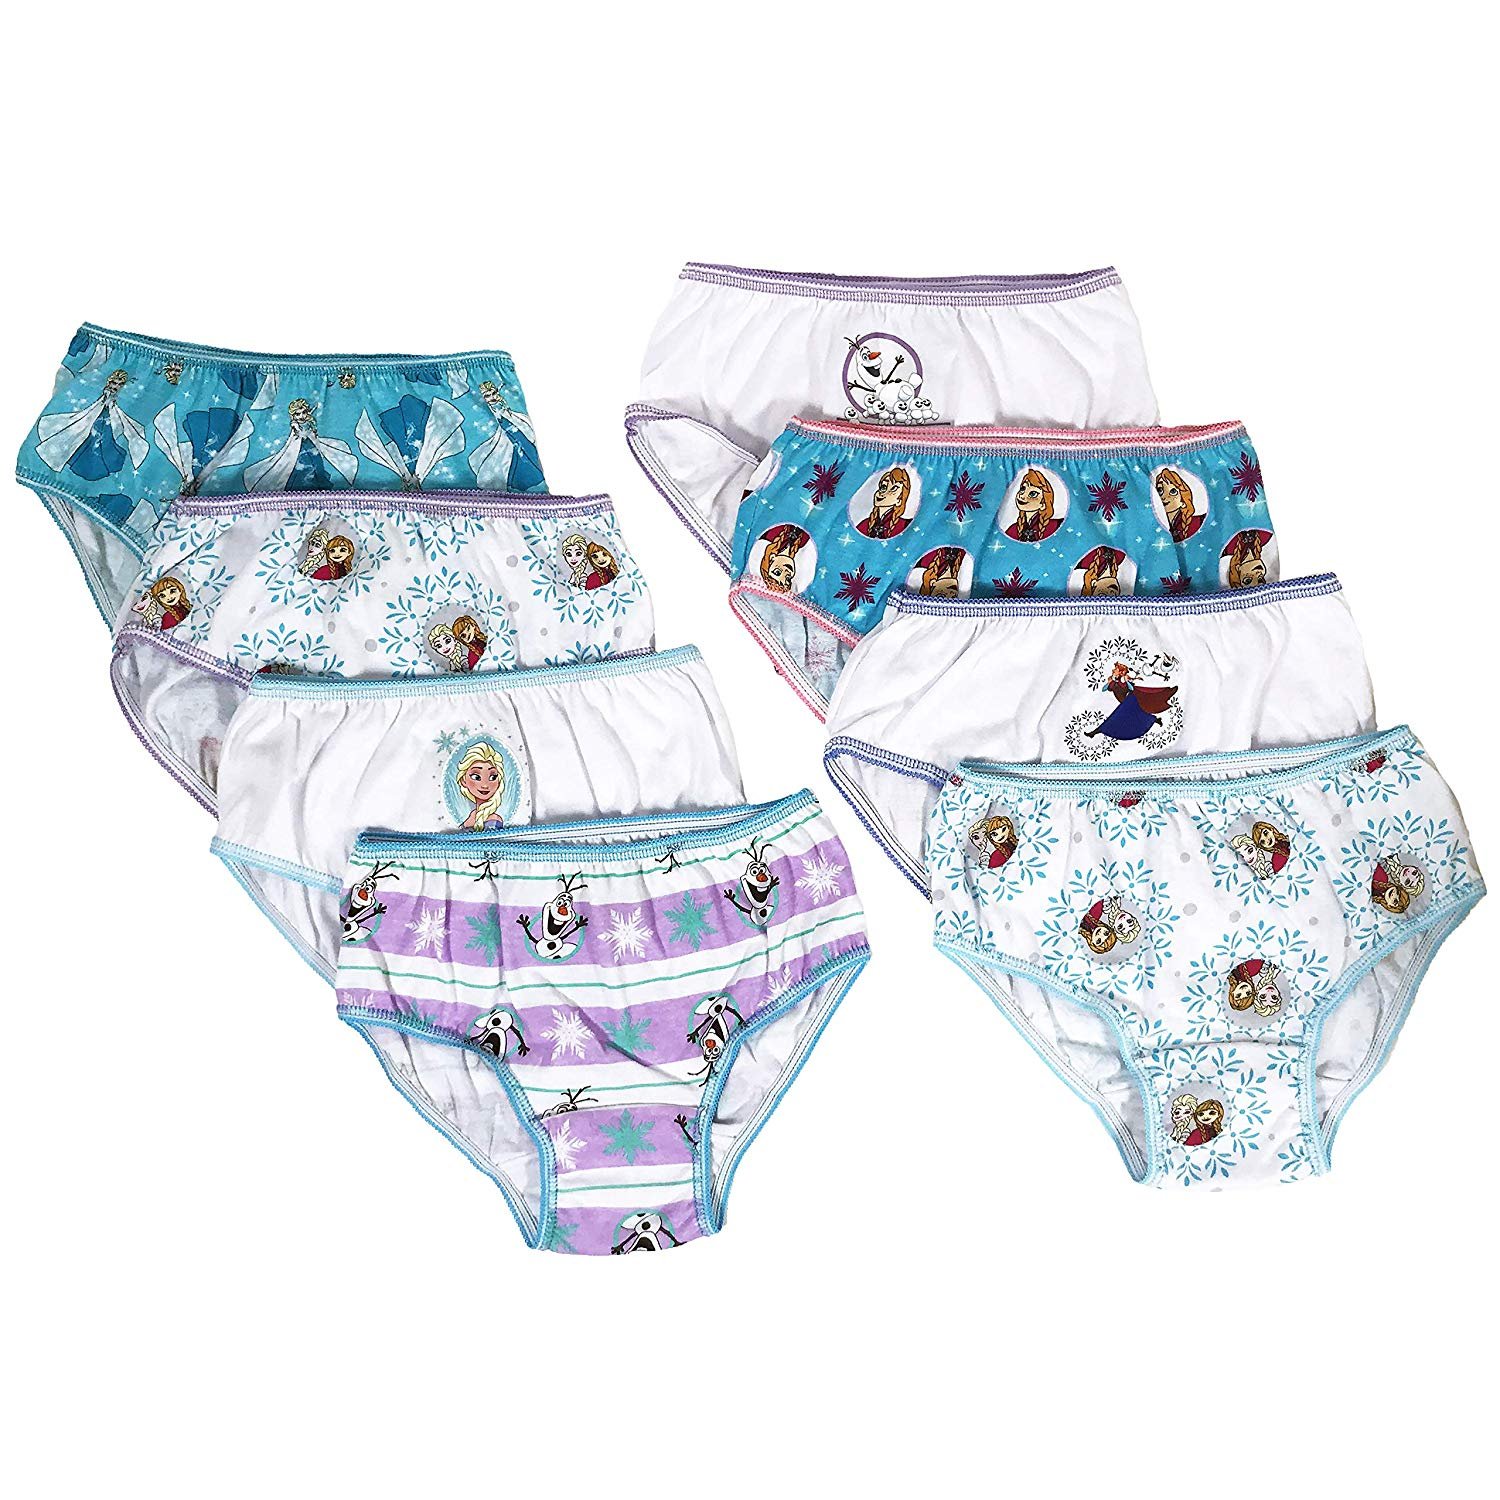 Frozen/Toy Story Girls Panties 8-Pack Sizes 18months 2T/3T, 4T, 4, 6, 8